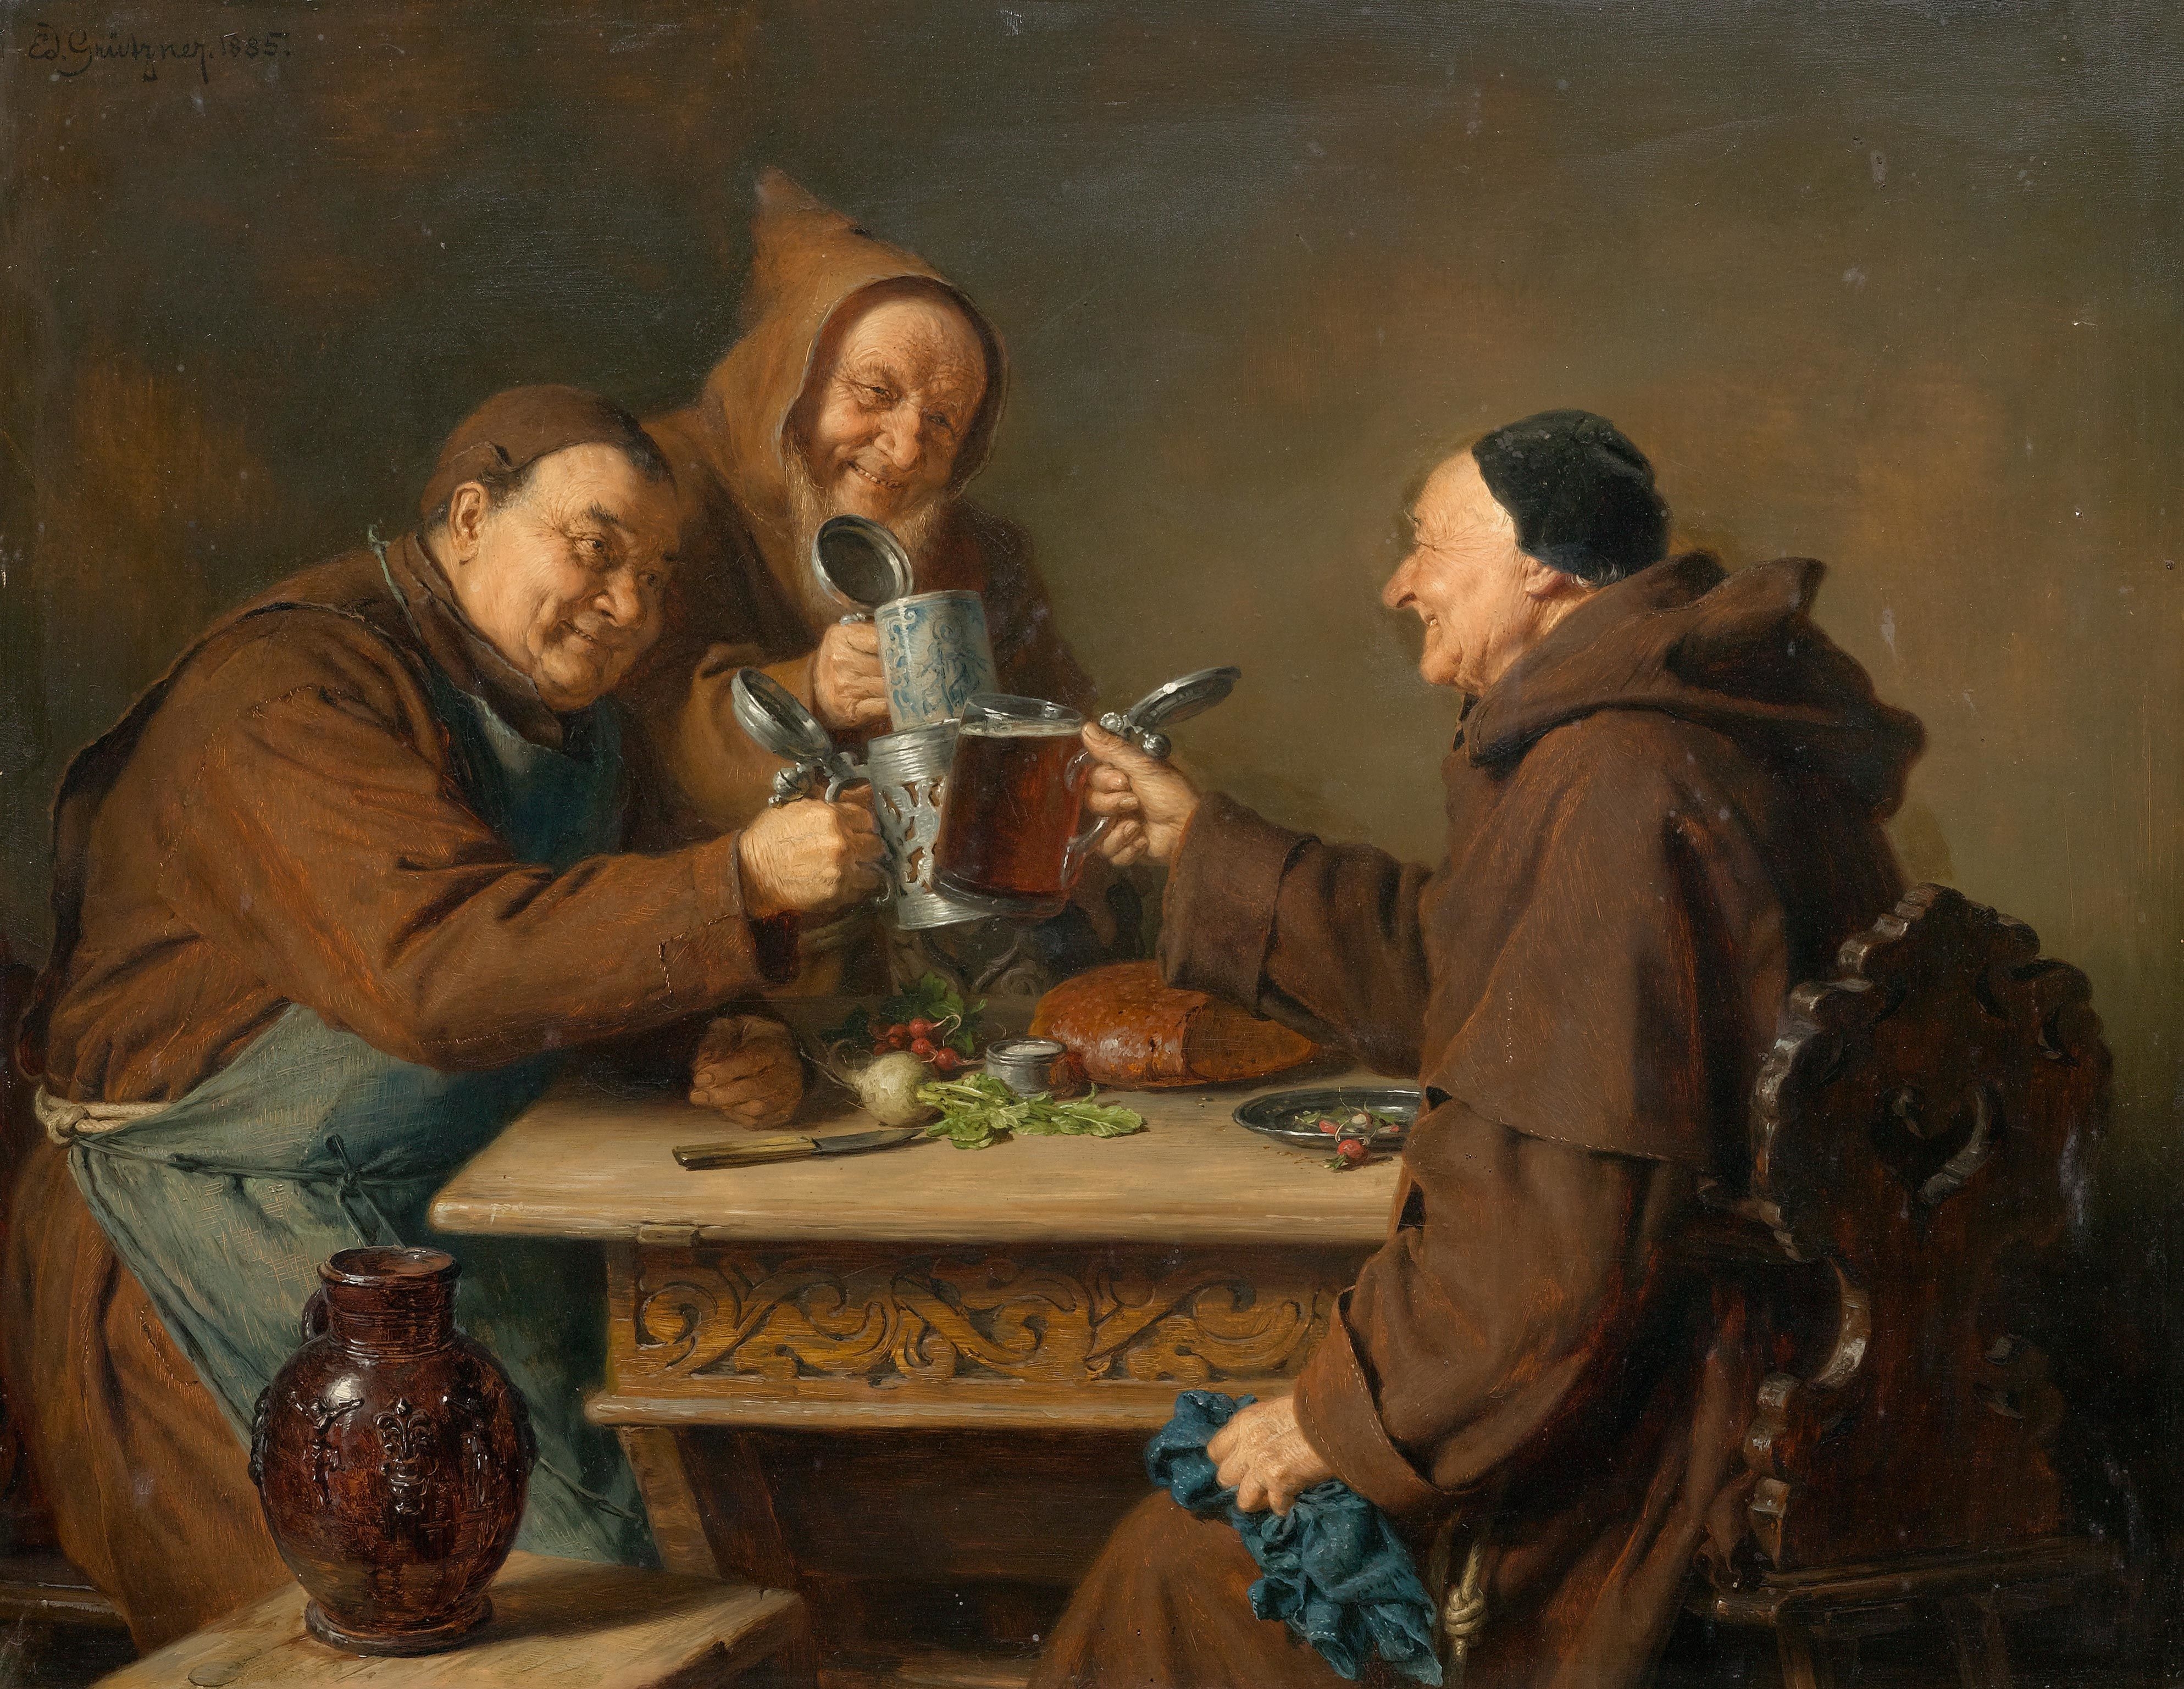 Three monks at mealtime